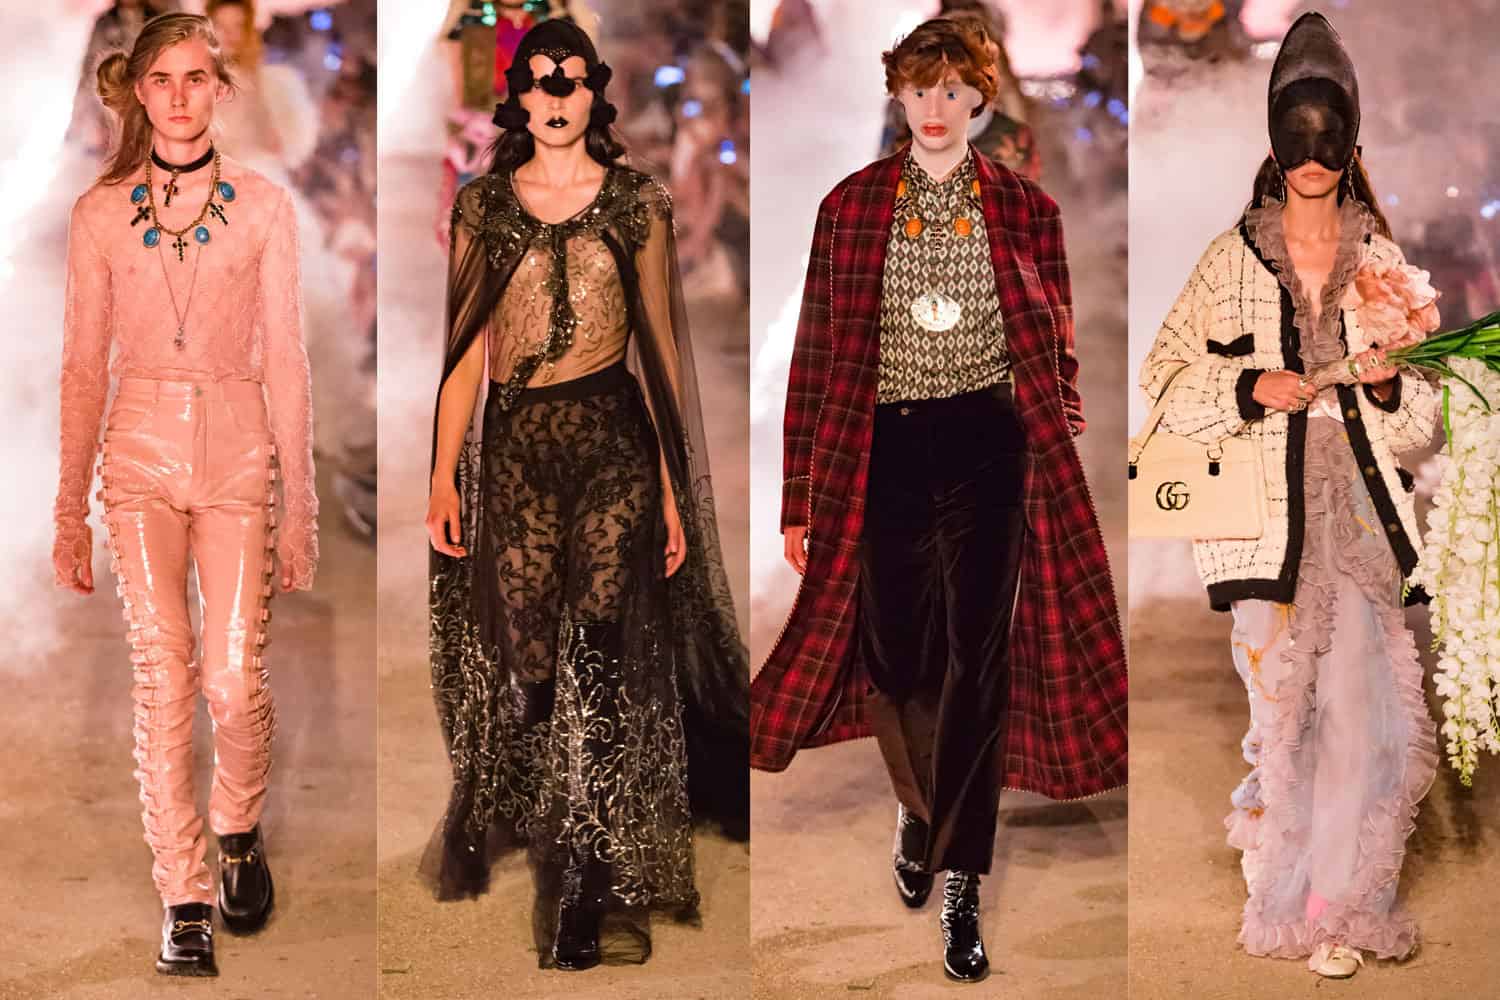 Gucci's 2019 Cruise Show Was (In Good